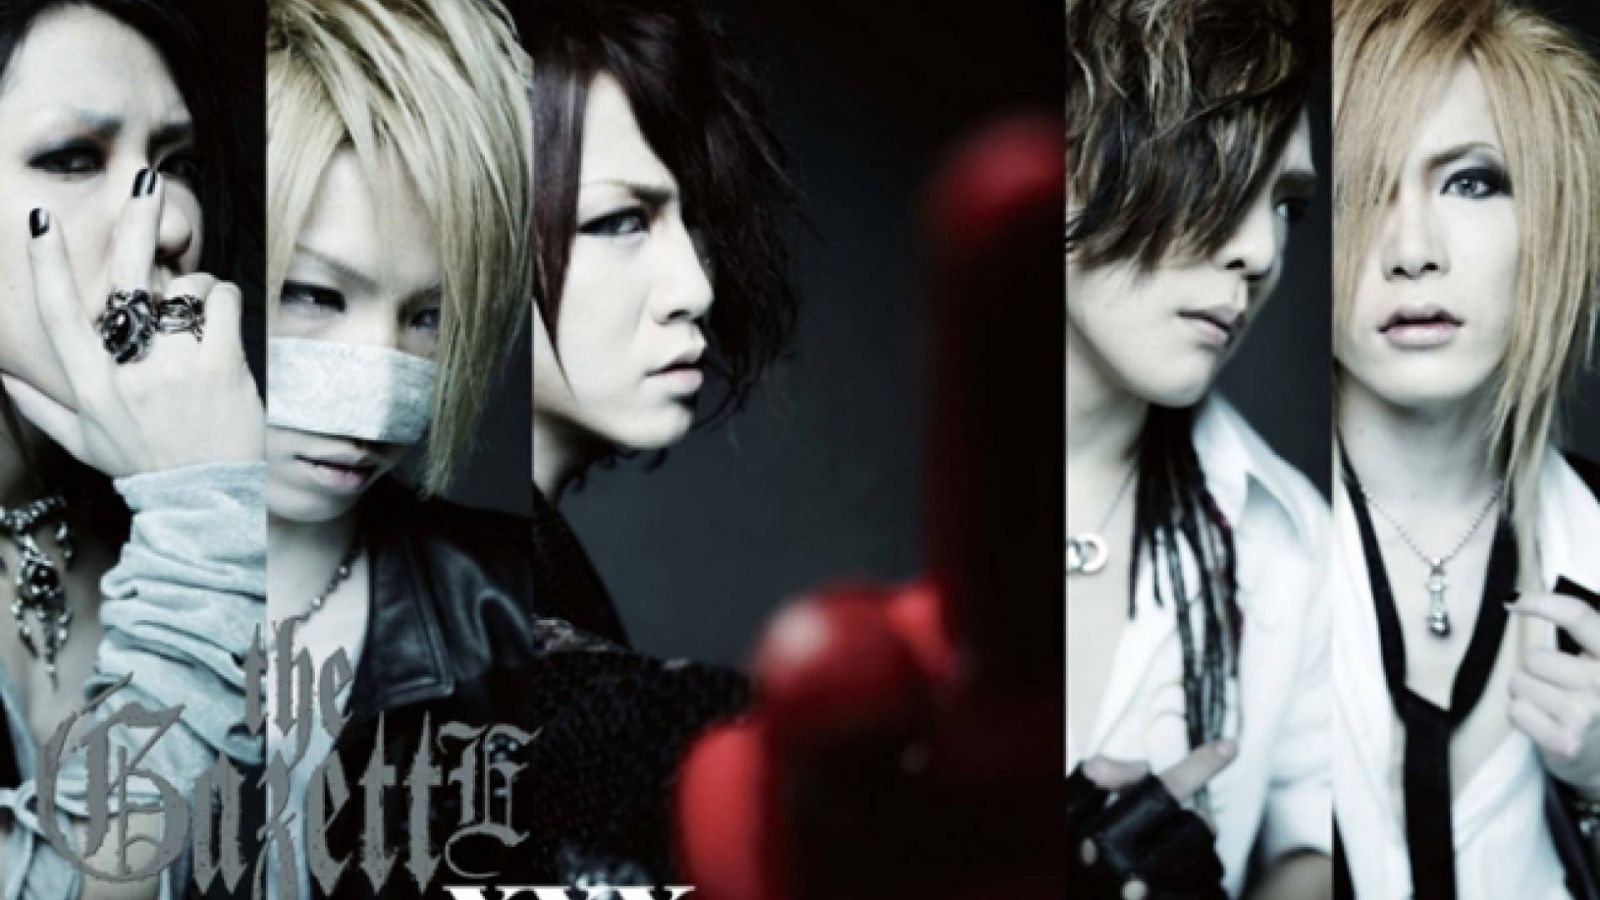 Релизы the GazettE © 2009 Zy.connection Inc. All Rights Reserved.